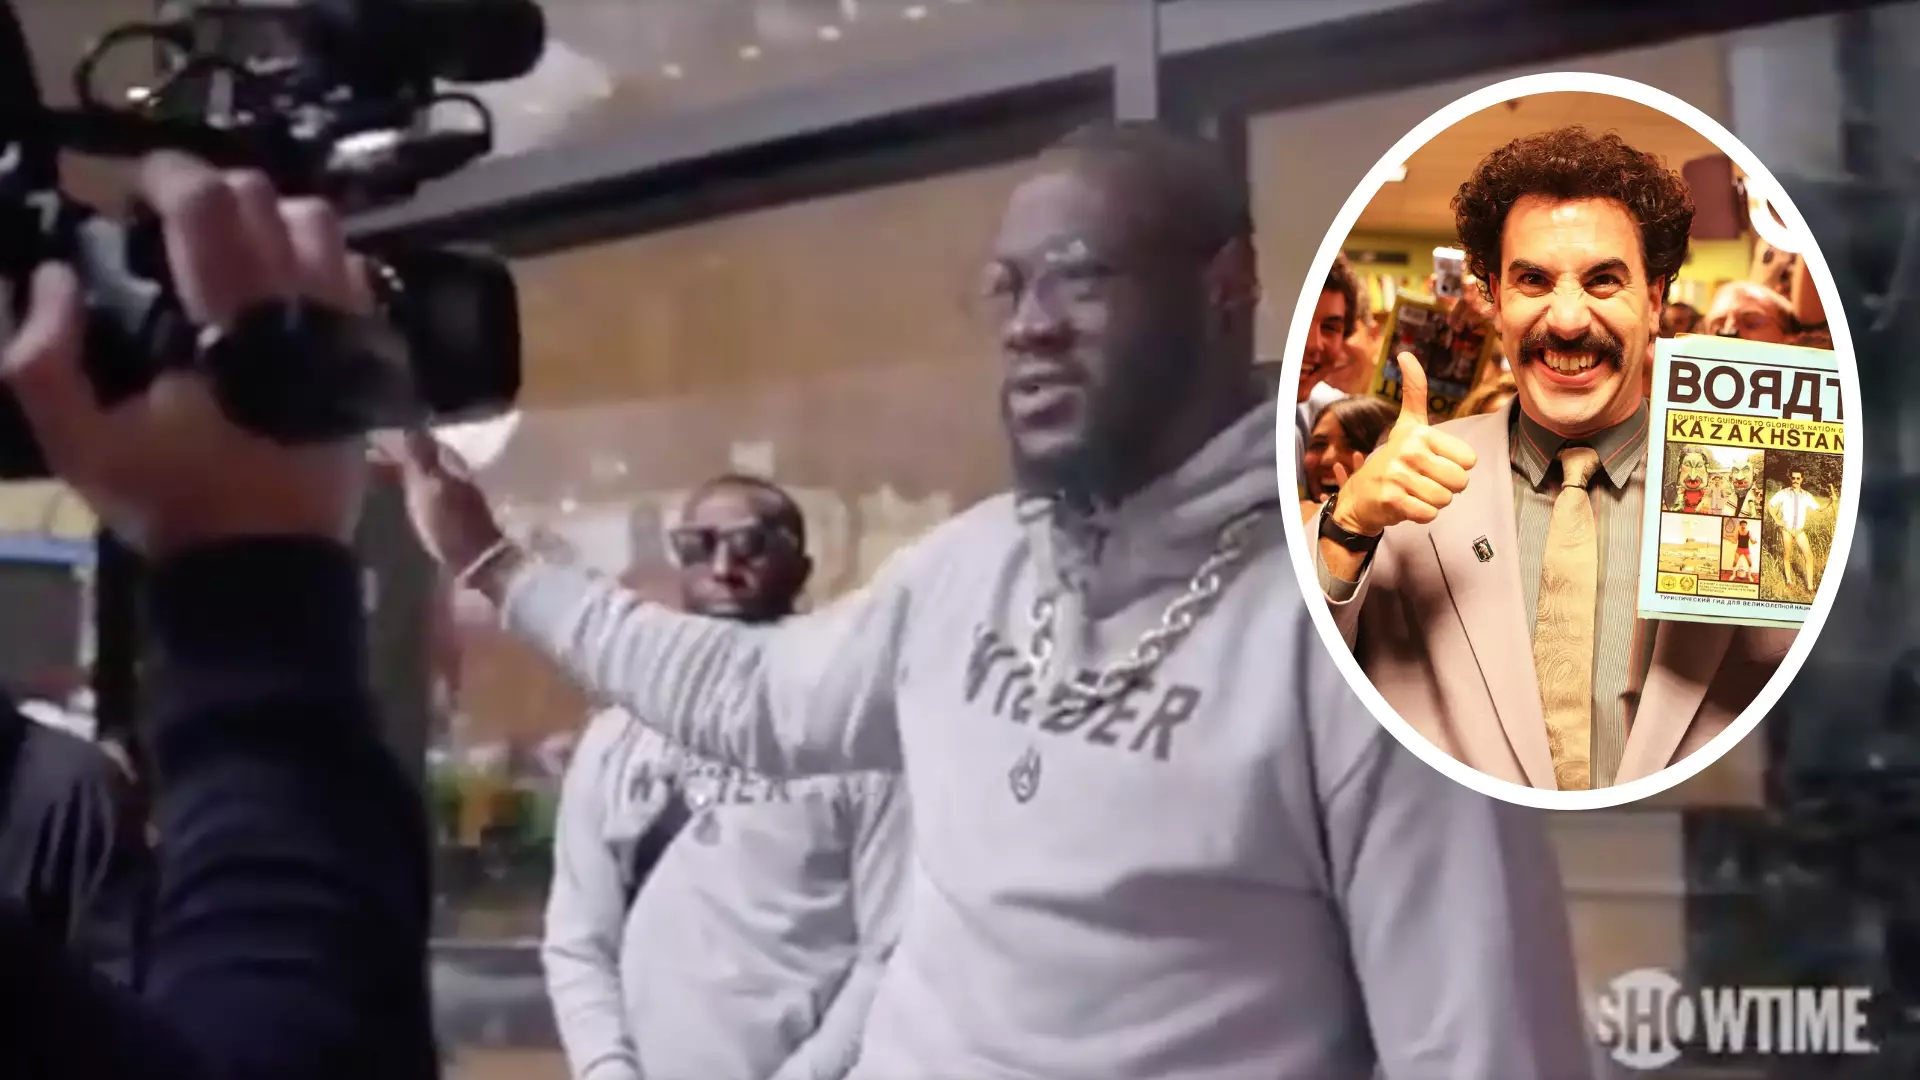 Fans Compare Deontay Wilder To Borat After His Shocking Attempt To Do An English Accent